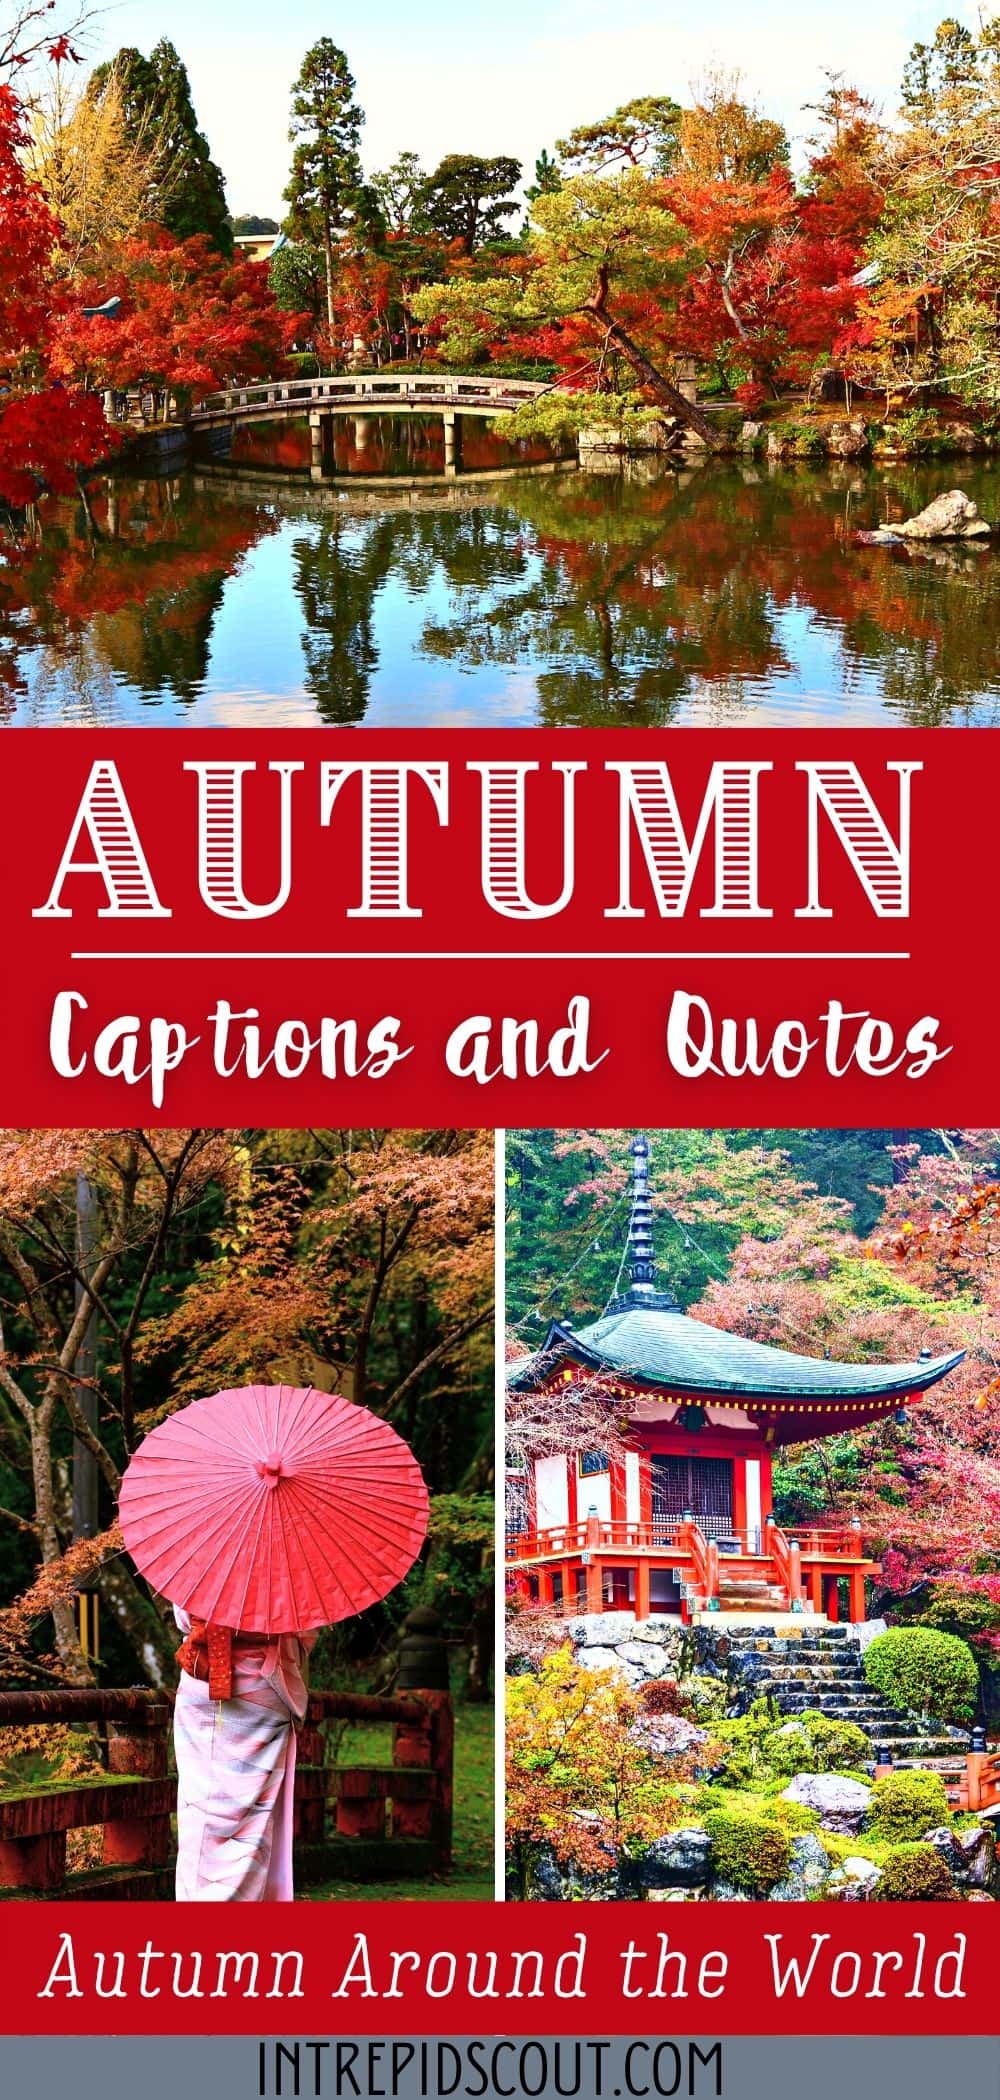 Autumn Captions and Quotes